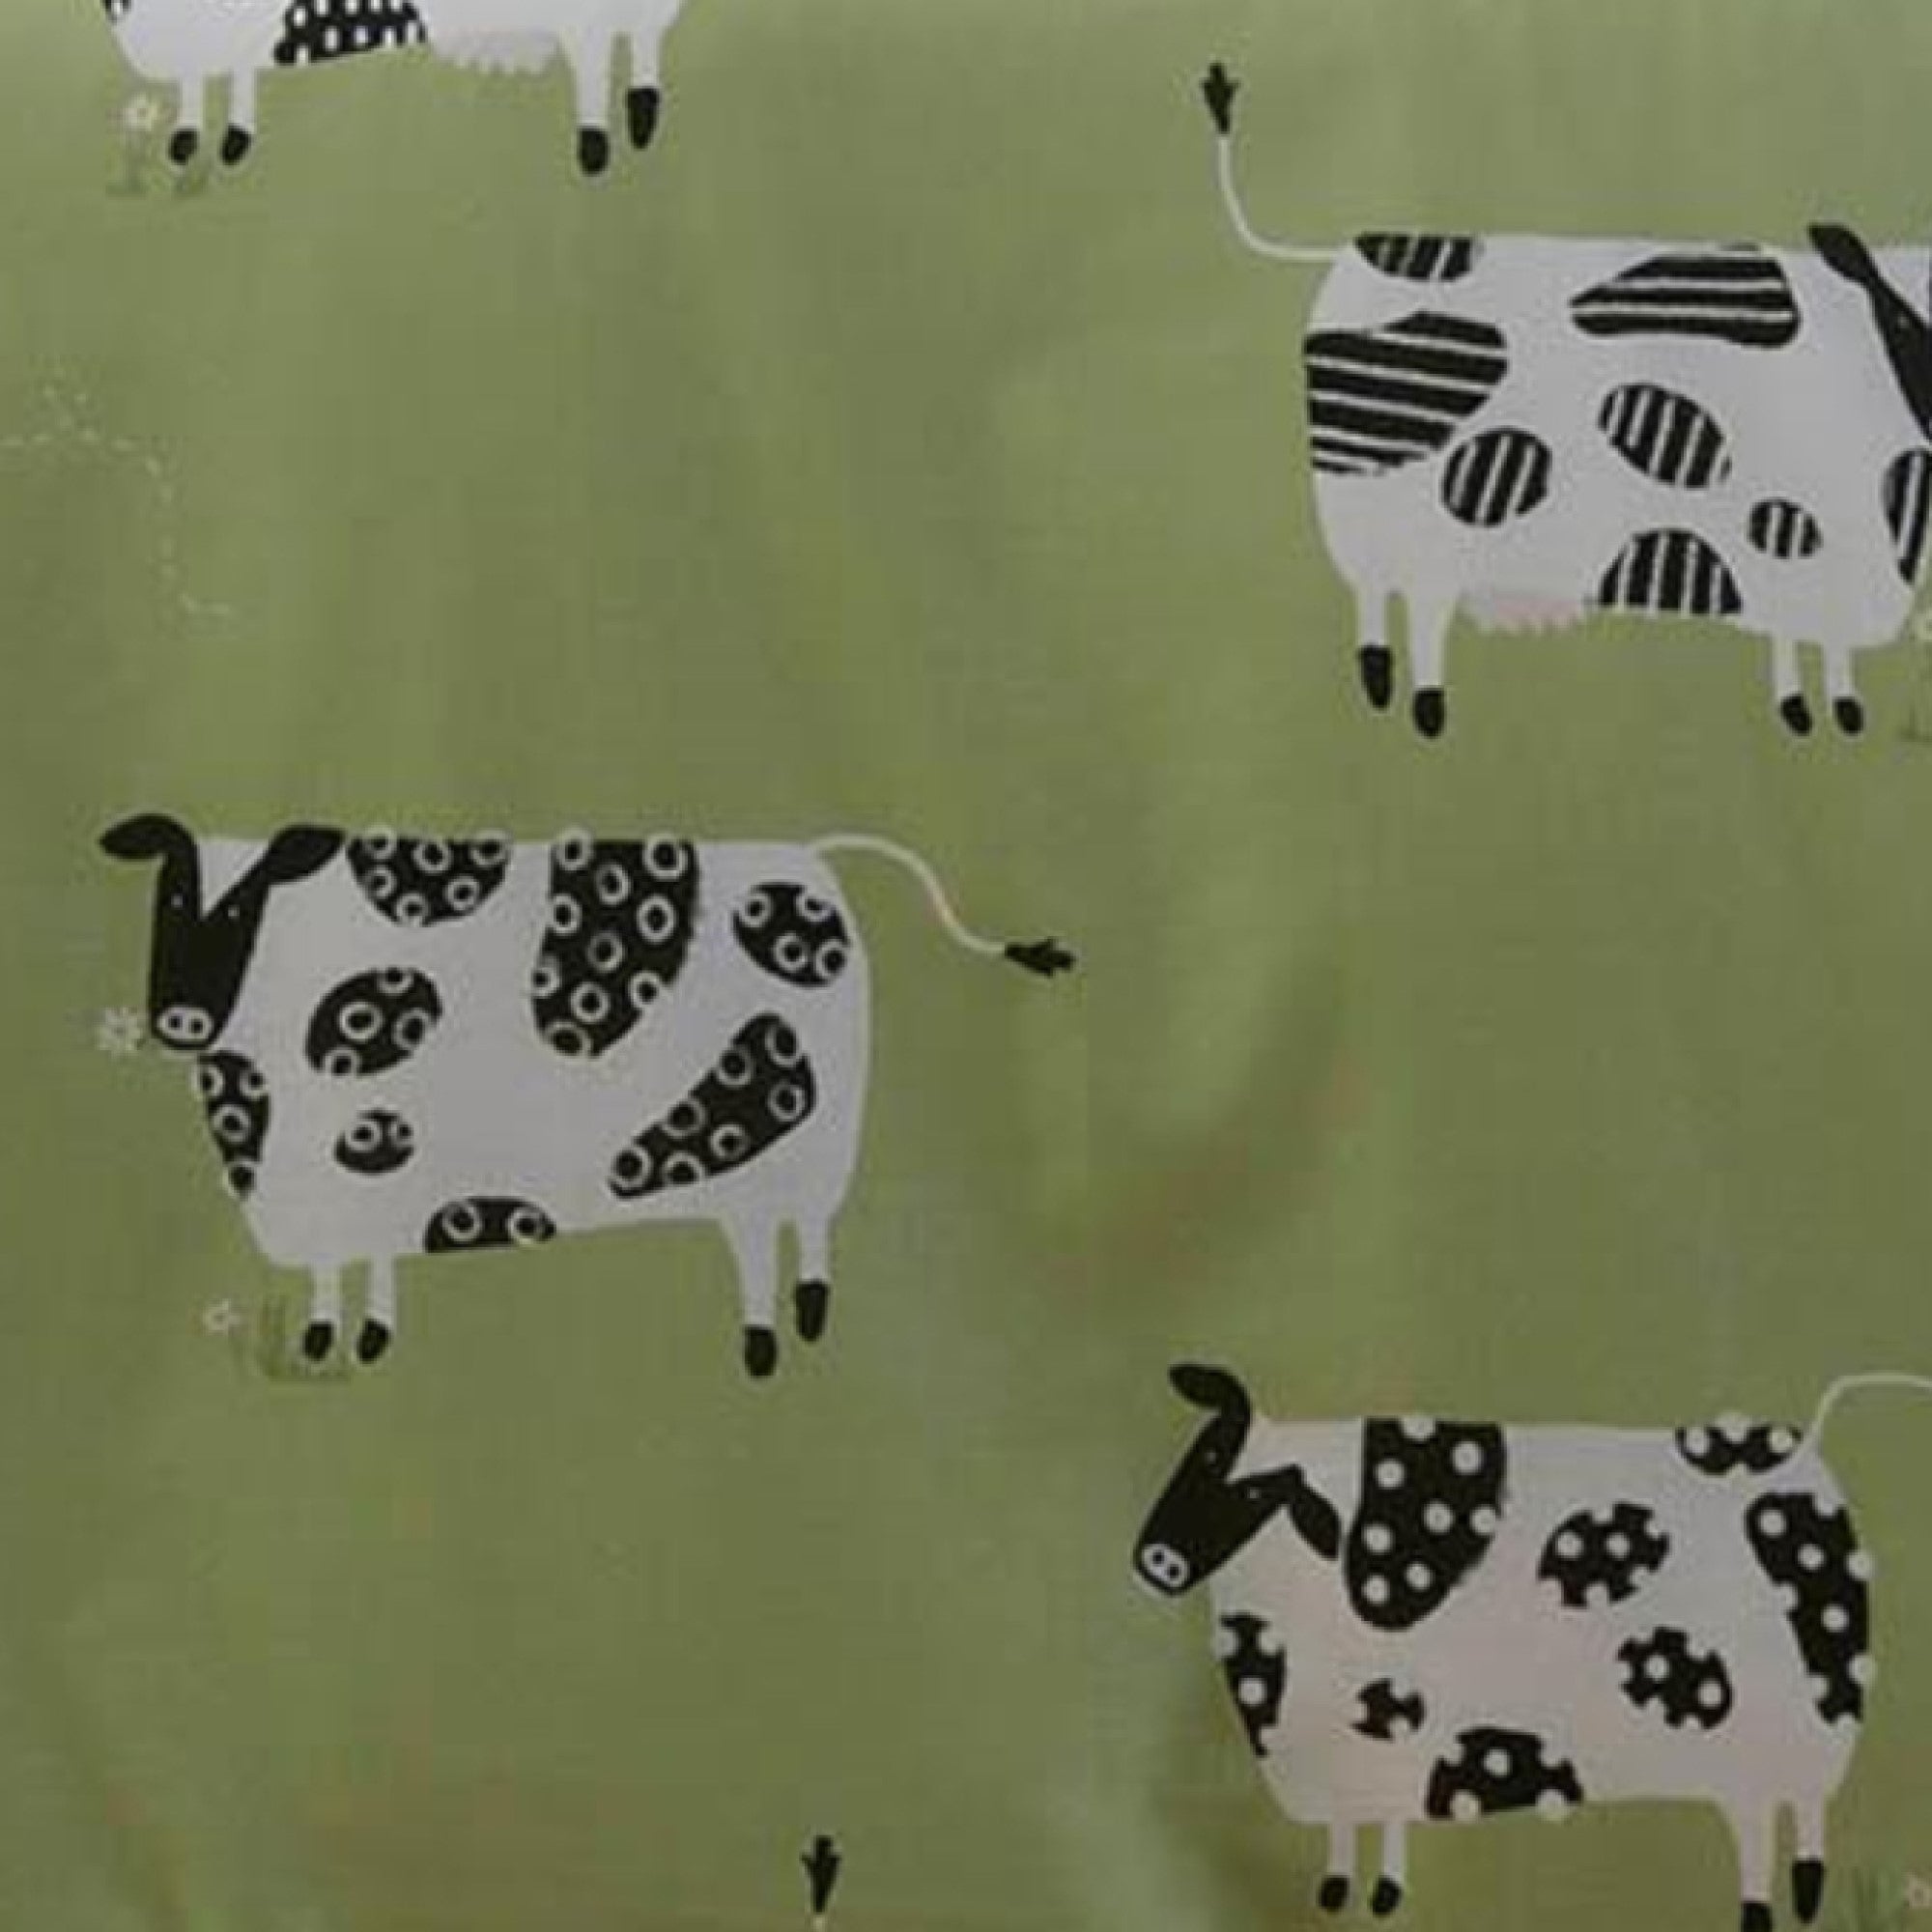 Duvet Cover Set Daisy Cow by Fusion in Green